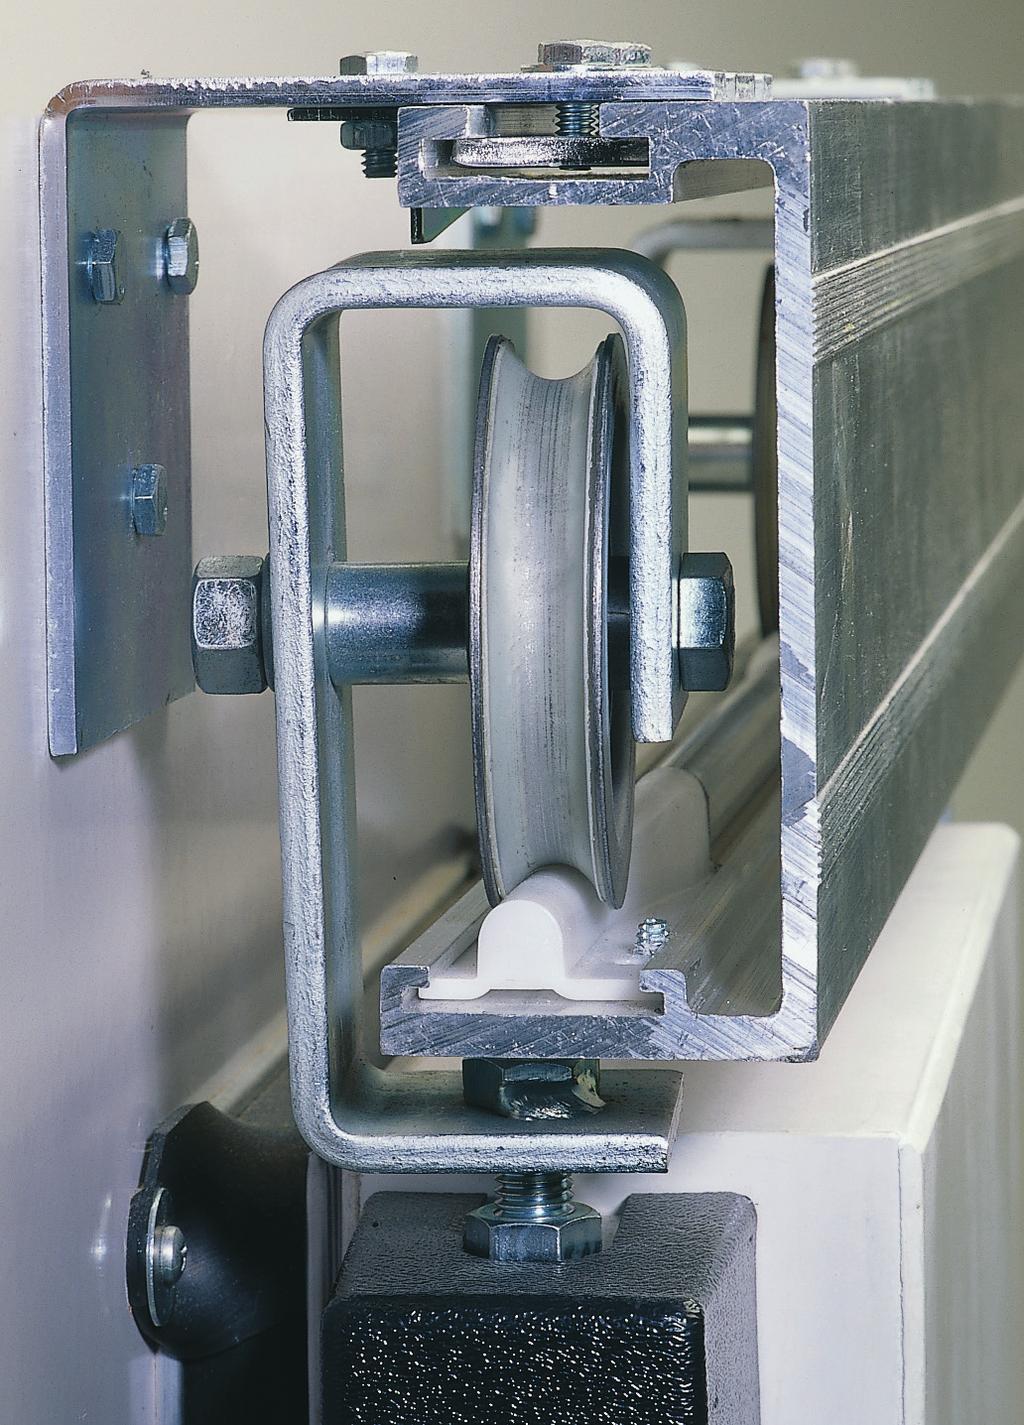 Micro leveling (G) allows for vertical door adjustment to maintain door seal; adjustment nuts are located for easy access.